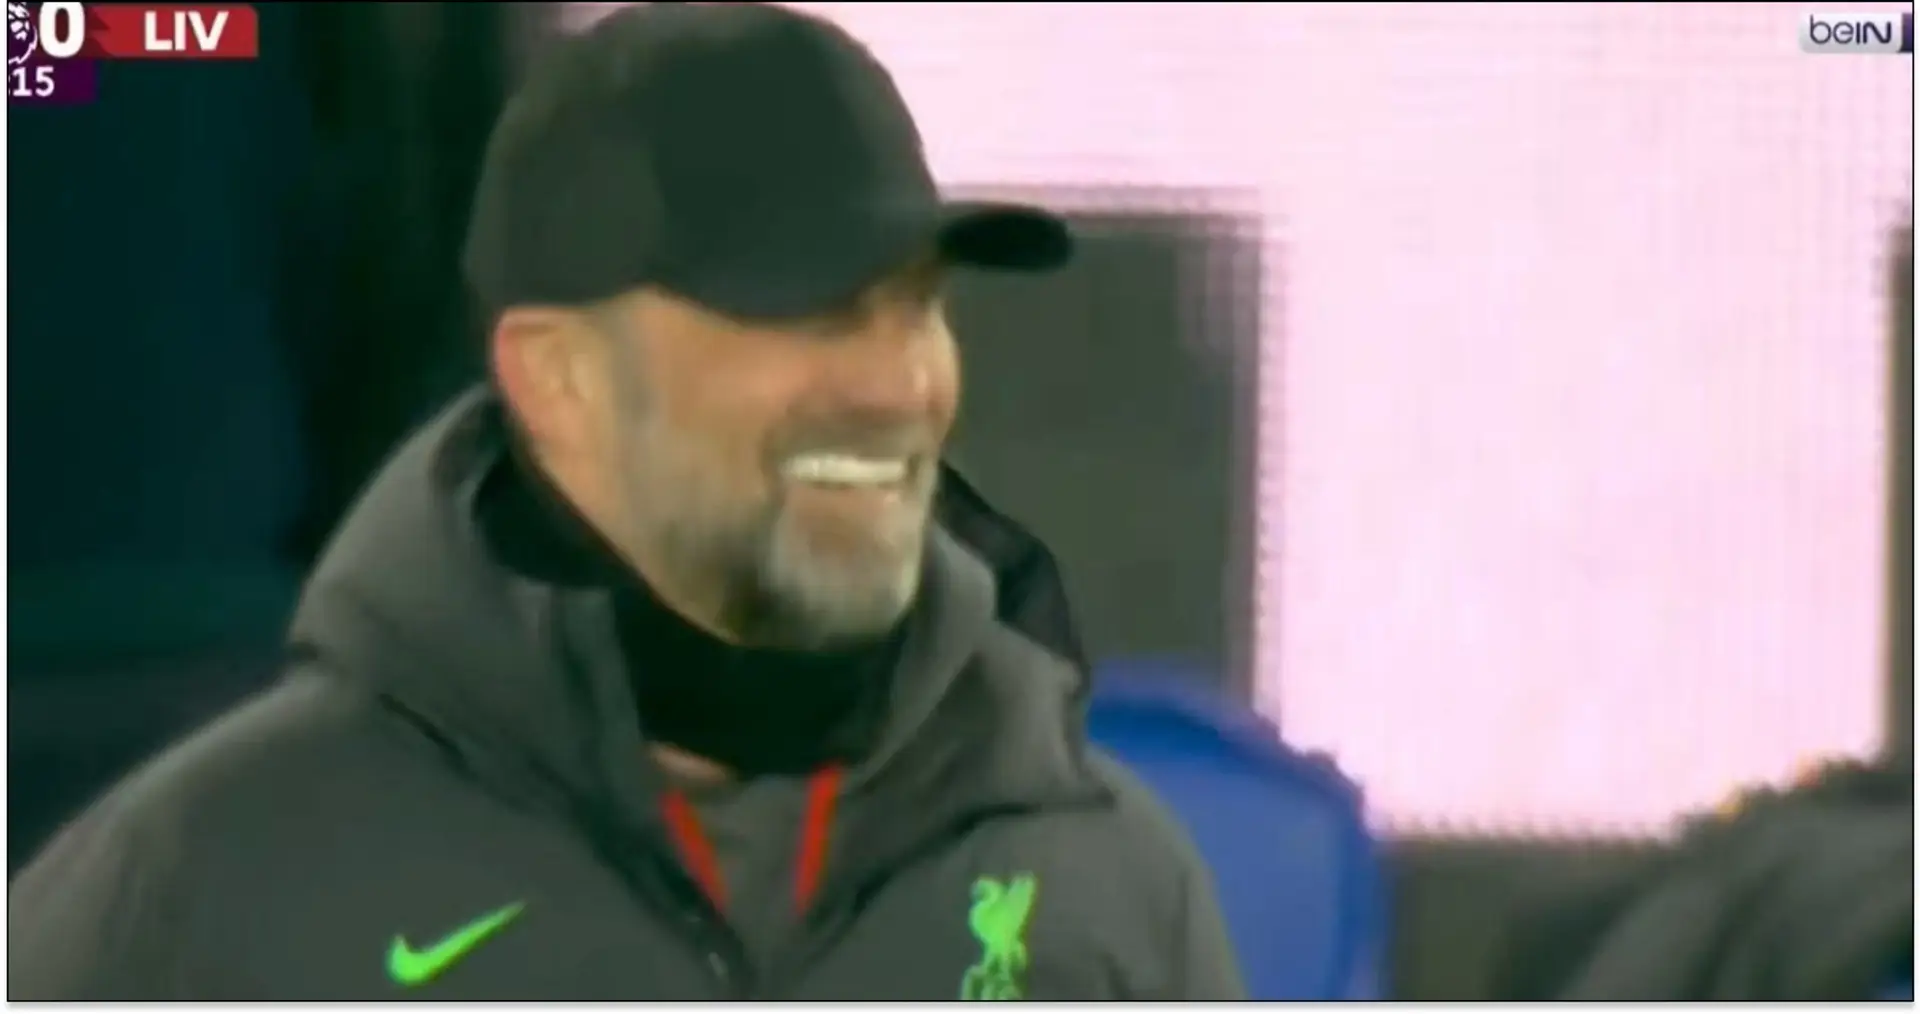 Spotted: Klopp smiling after Everton double lead